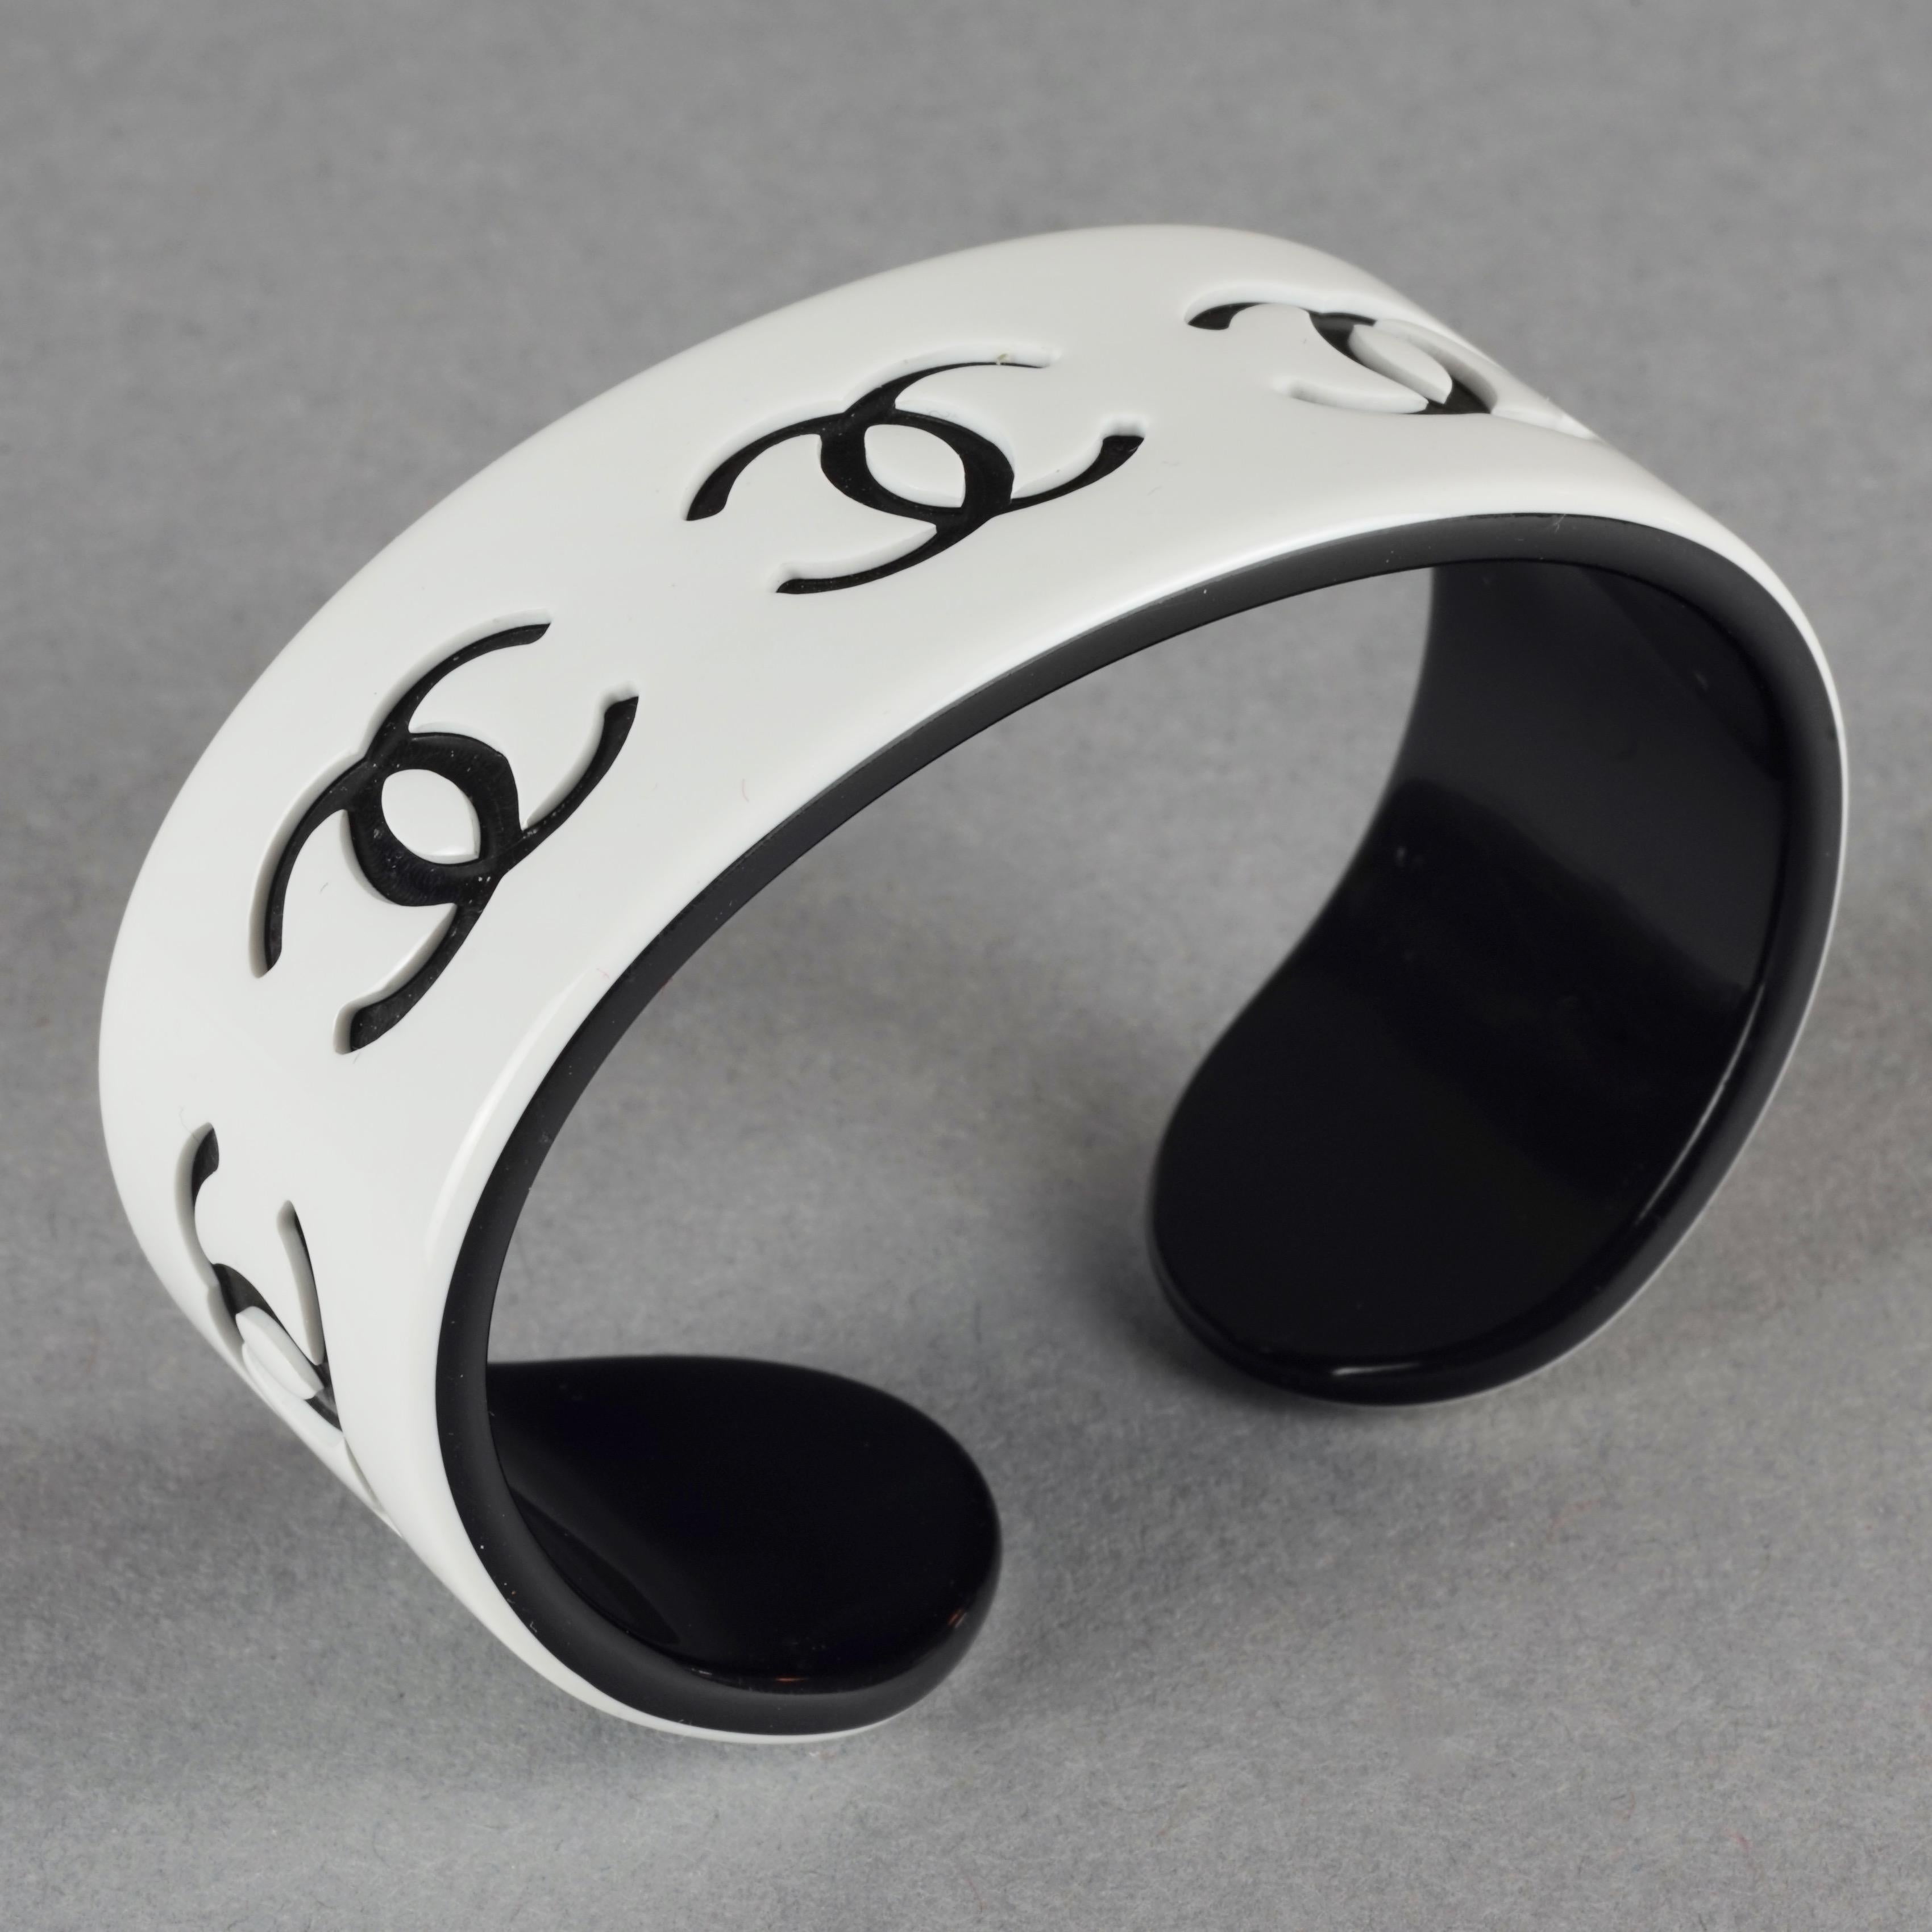 Vintage 2002 CHANEL White and Black CC Logo Perspex Cuff Bracelet

Measurements:
Height: 0.86 inch (2.2 cm)
Maximum Circumference: 6.10 inches (15.5 cm) including the opening

Features:
- 100% Authentic CHANEL.
- White perspex cuff bracelet with